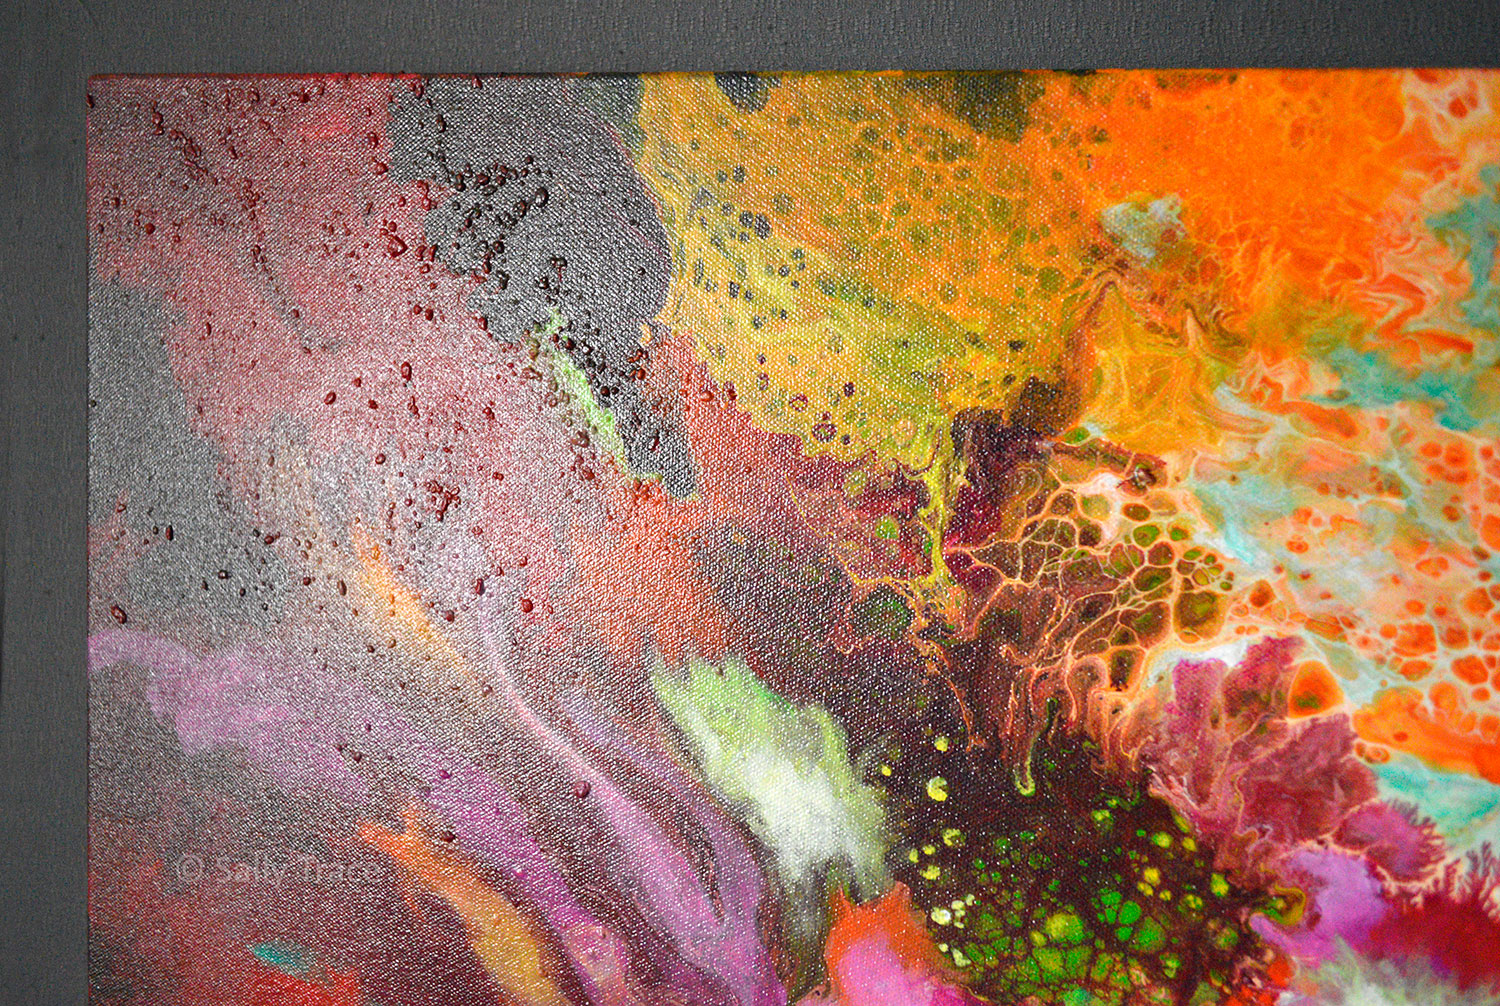 Harmonic Vibrations, original fluid acrylic pour painting for sale by Sally Trace, detail view